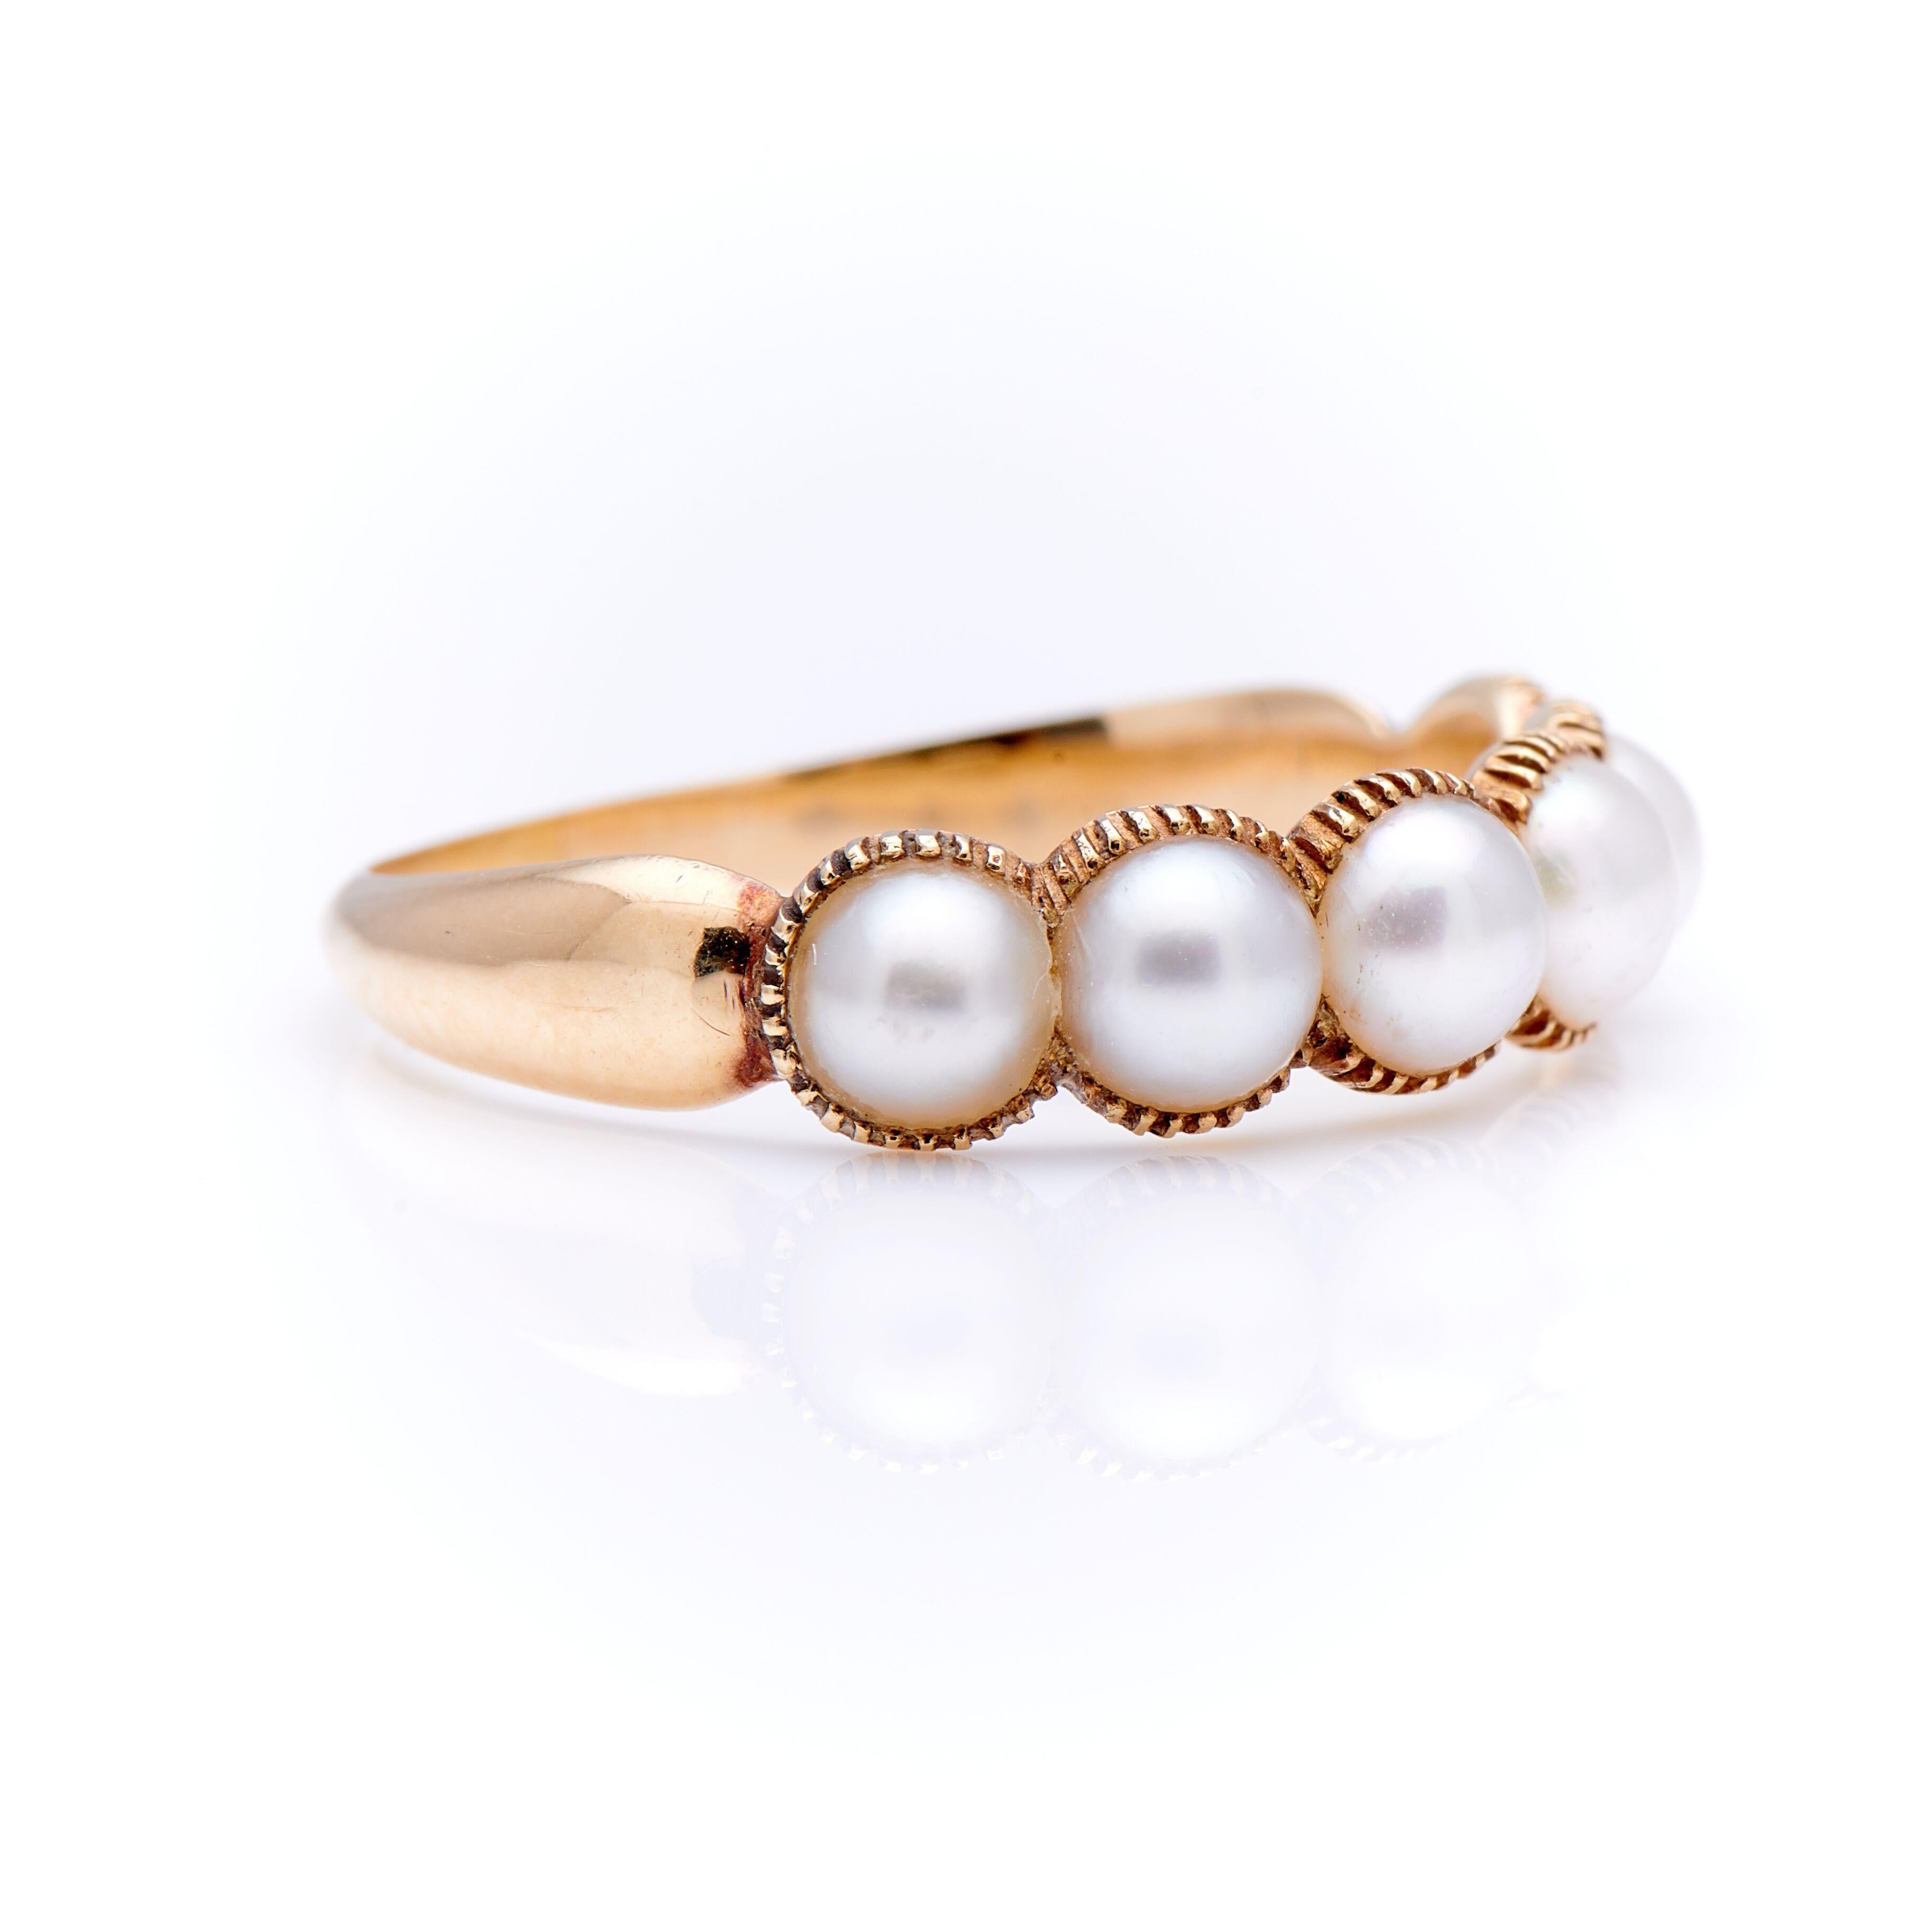 Georgian, natural pearl ring, circa 1810. A very pretty pearl half hoop ring, set with six lustrous spilt pearls in a crimped plain gold band. The pearls are all beautifully matched and original. It is rare to find this type of ring in such amazing